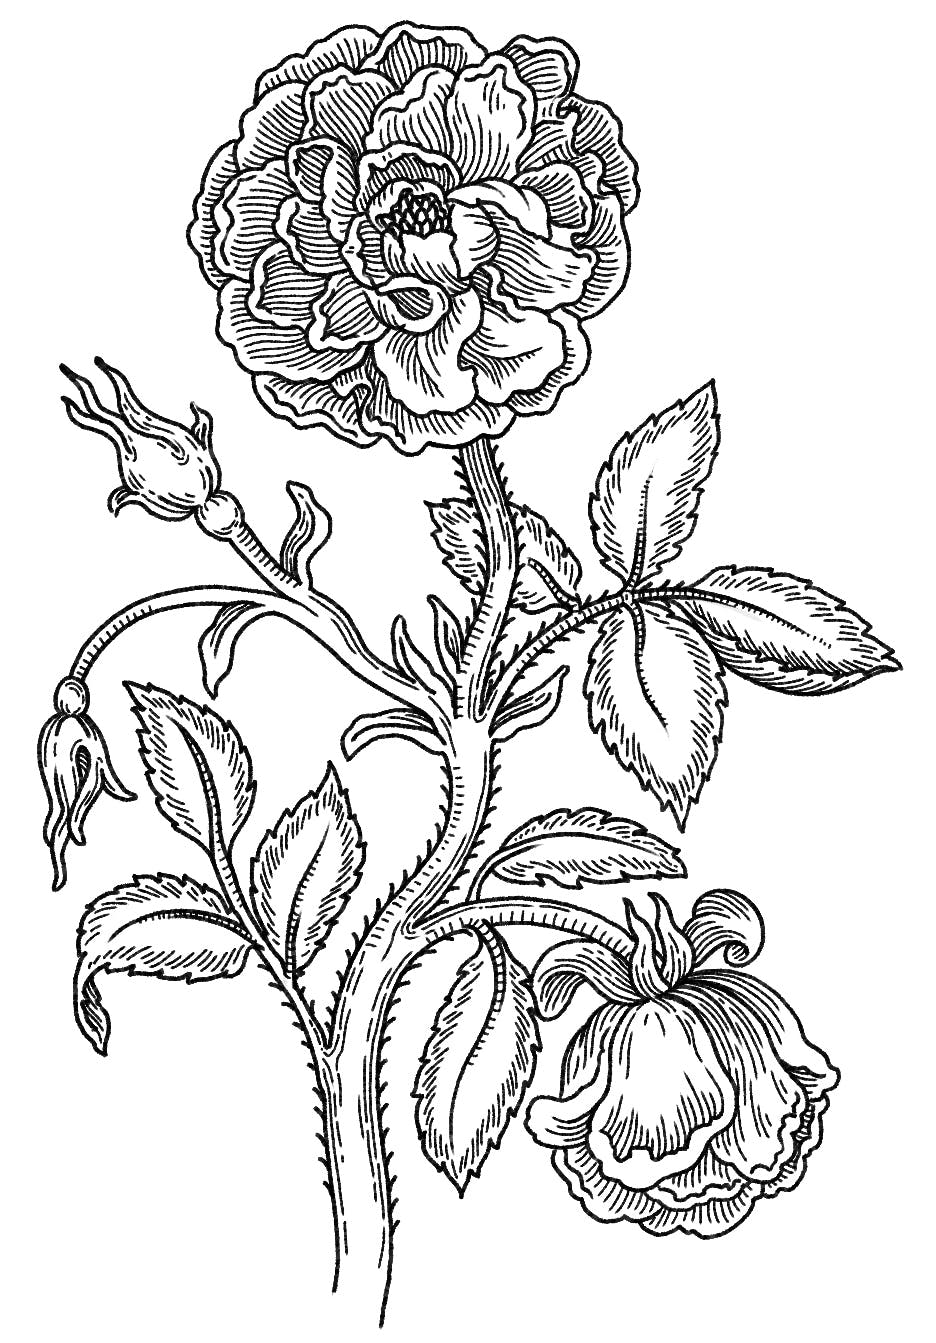 Illustration of a rose in an XVI century engraving style